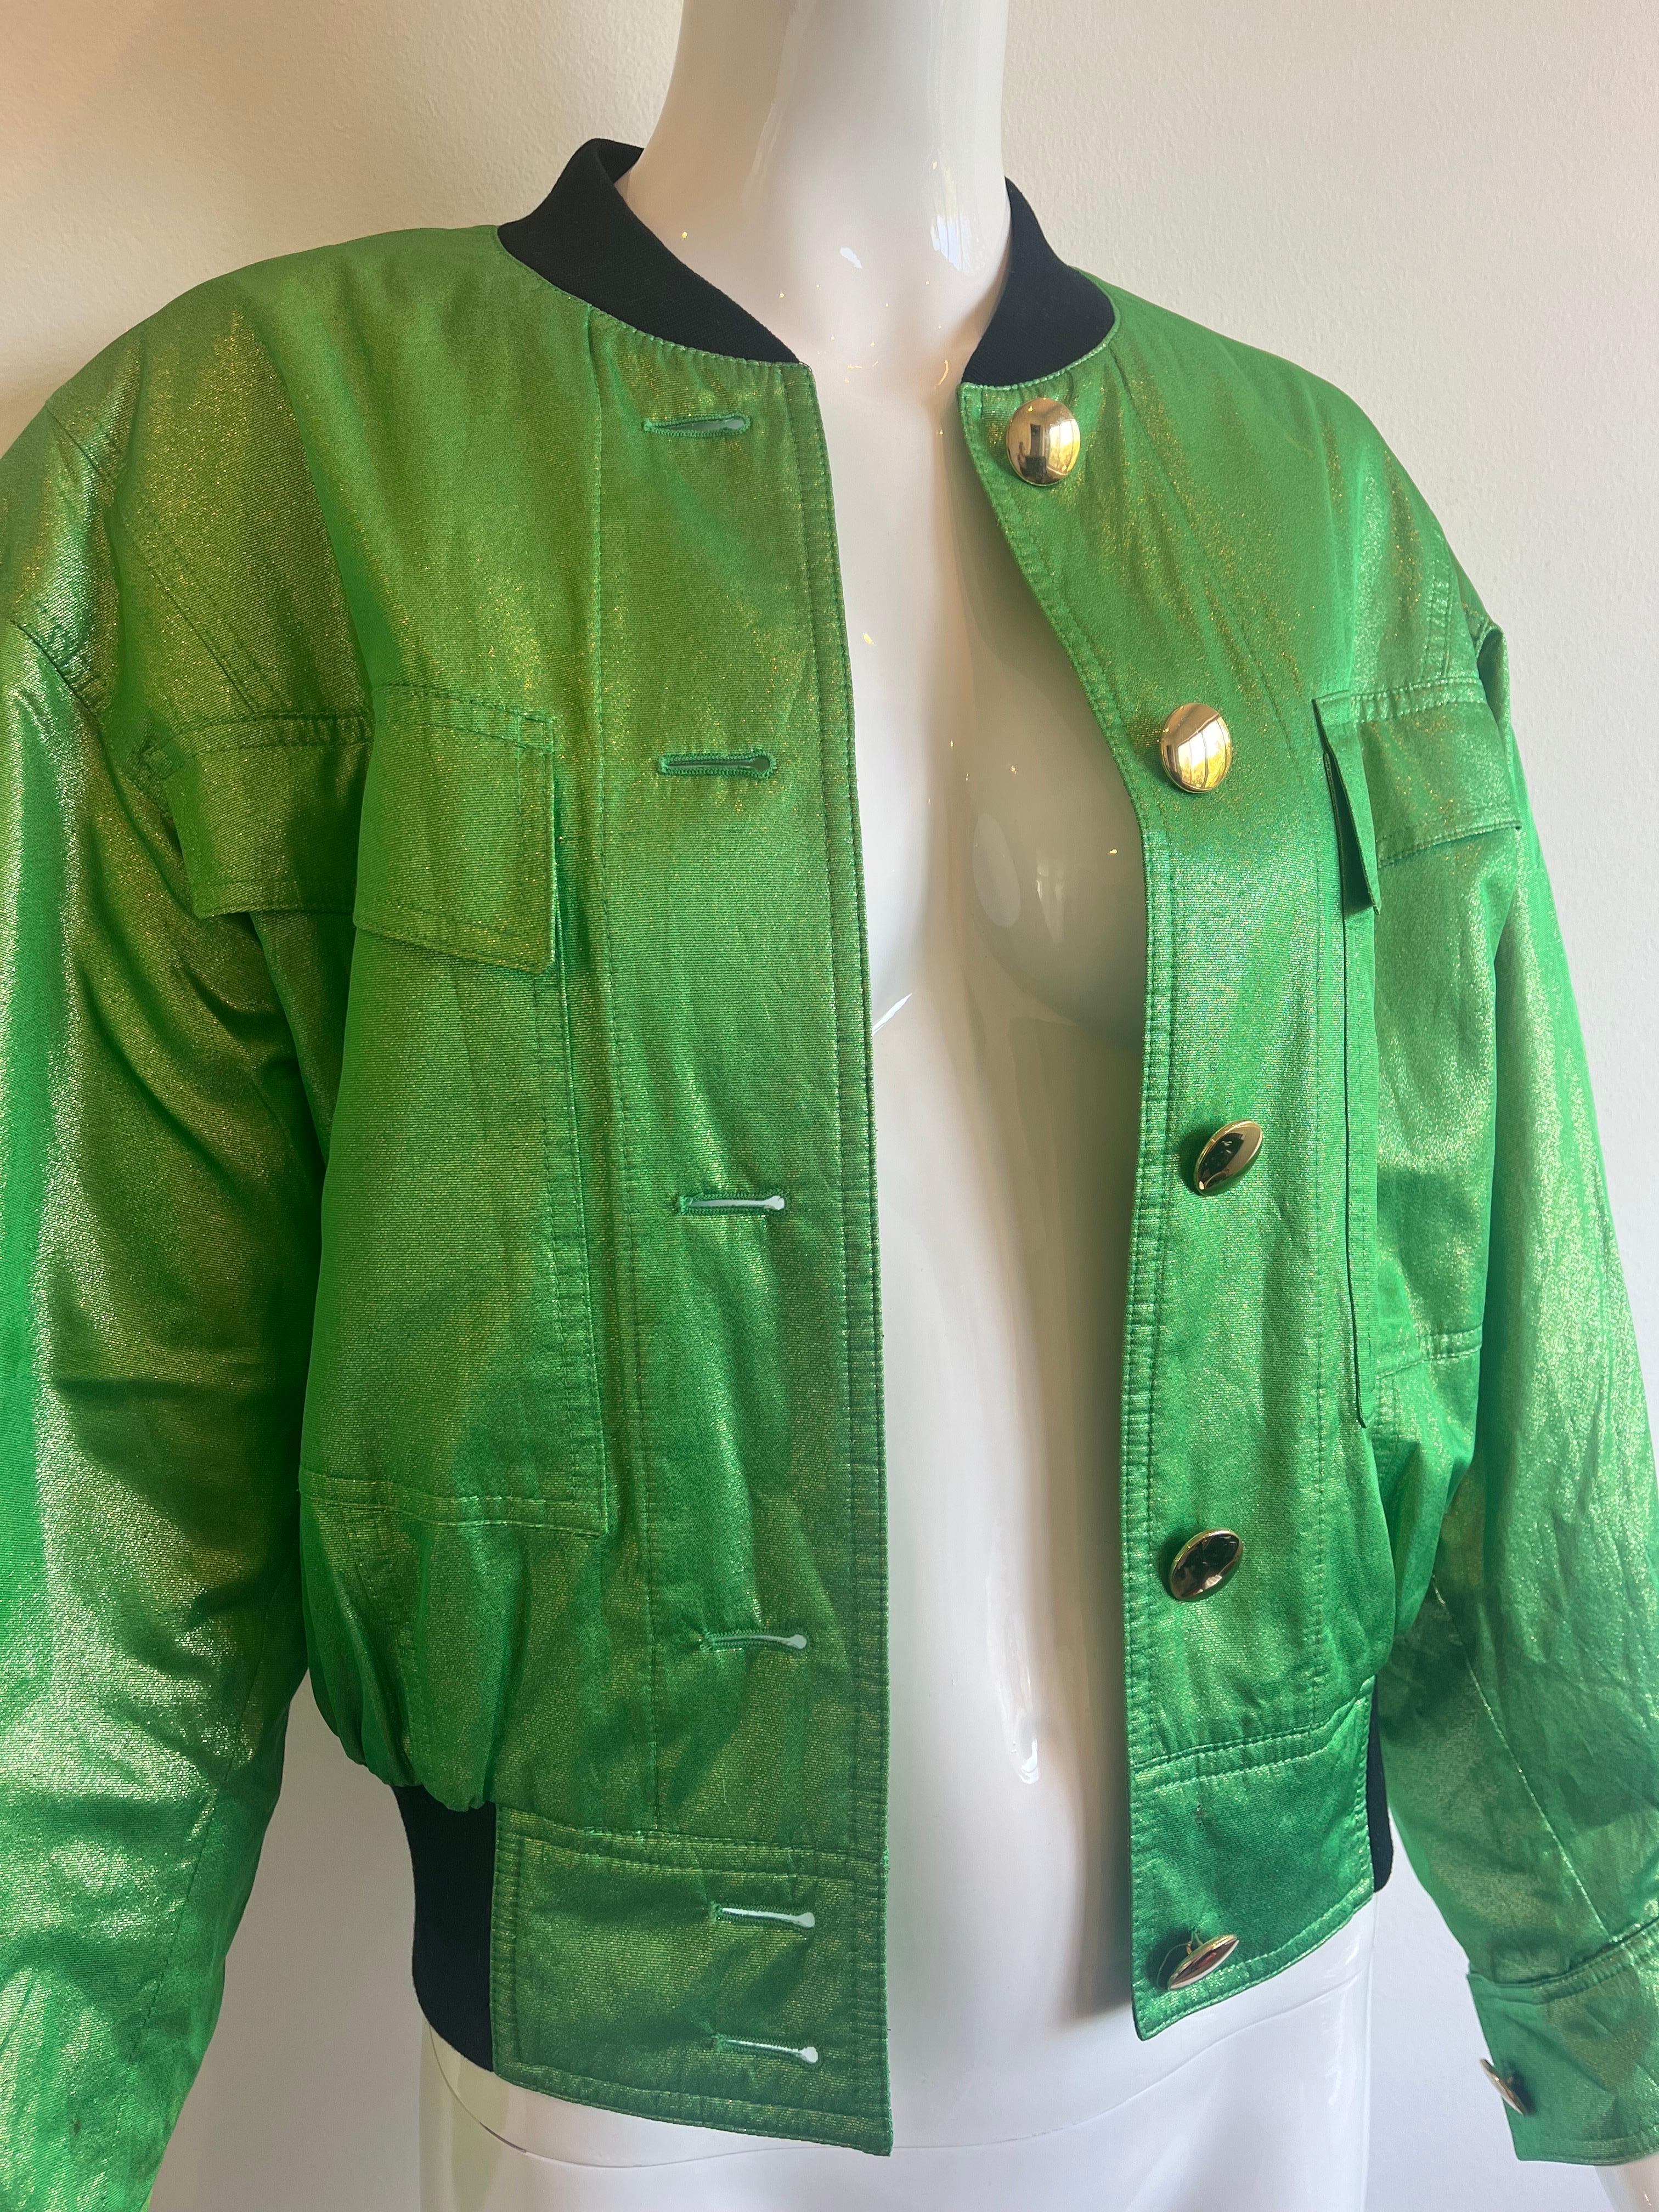 Funky 1990s Escada bomber jacket in an eye catching green metallic outer fabric with big gold button closure.  The inside lining is a pop art heart print in green and bright colors.  The cuffs and waist are a stretchy soft sweatshirt band material. 